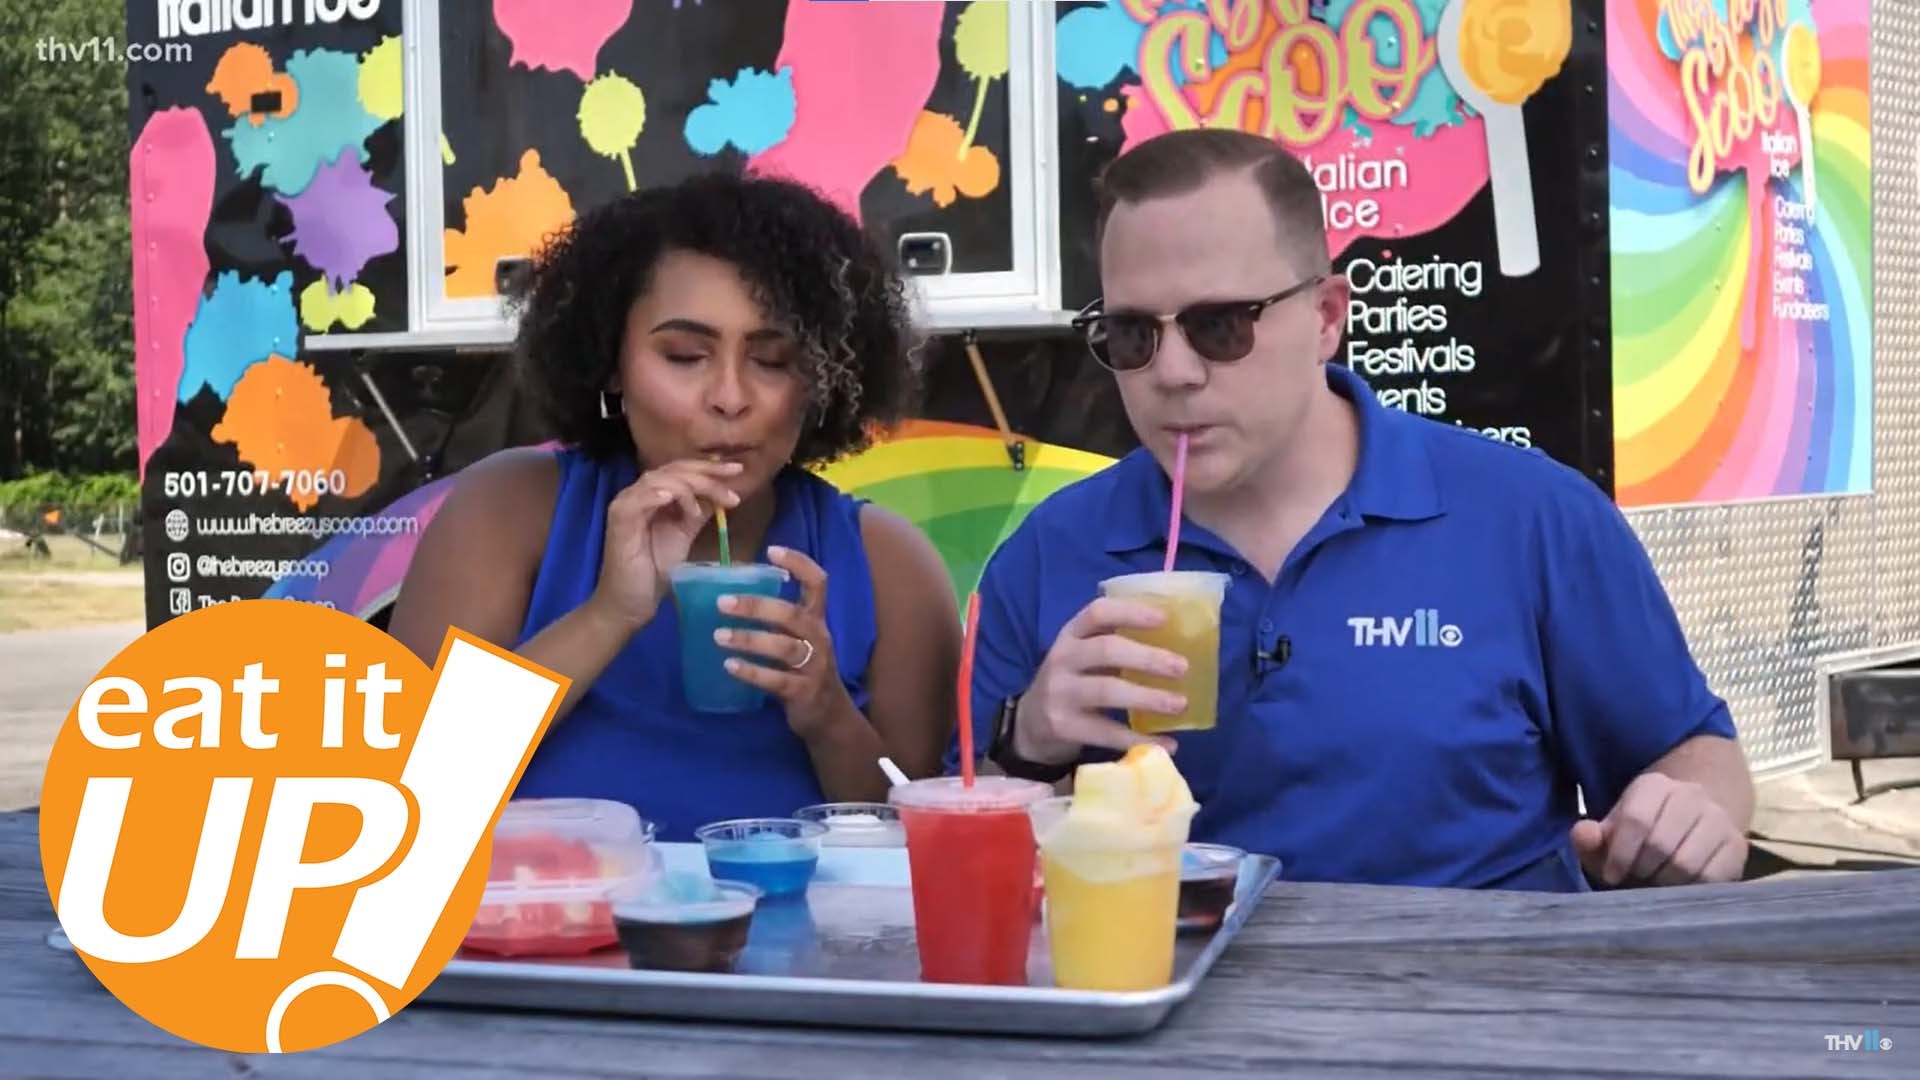 Skot Covert and Mackailyn Johnson take us to the Breezy Scoop in Little Rock, a colorful place known for its Italian ice.